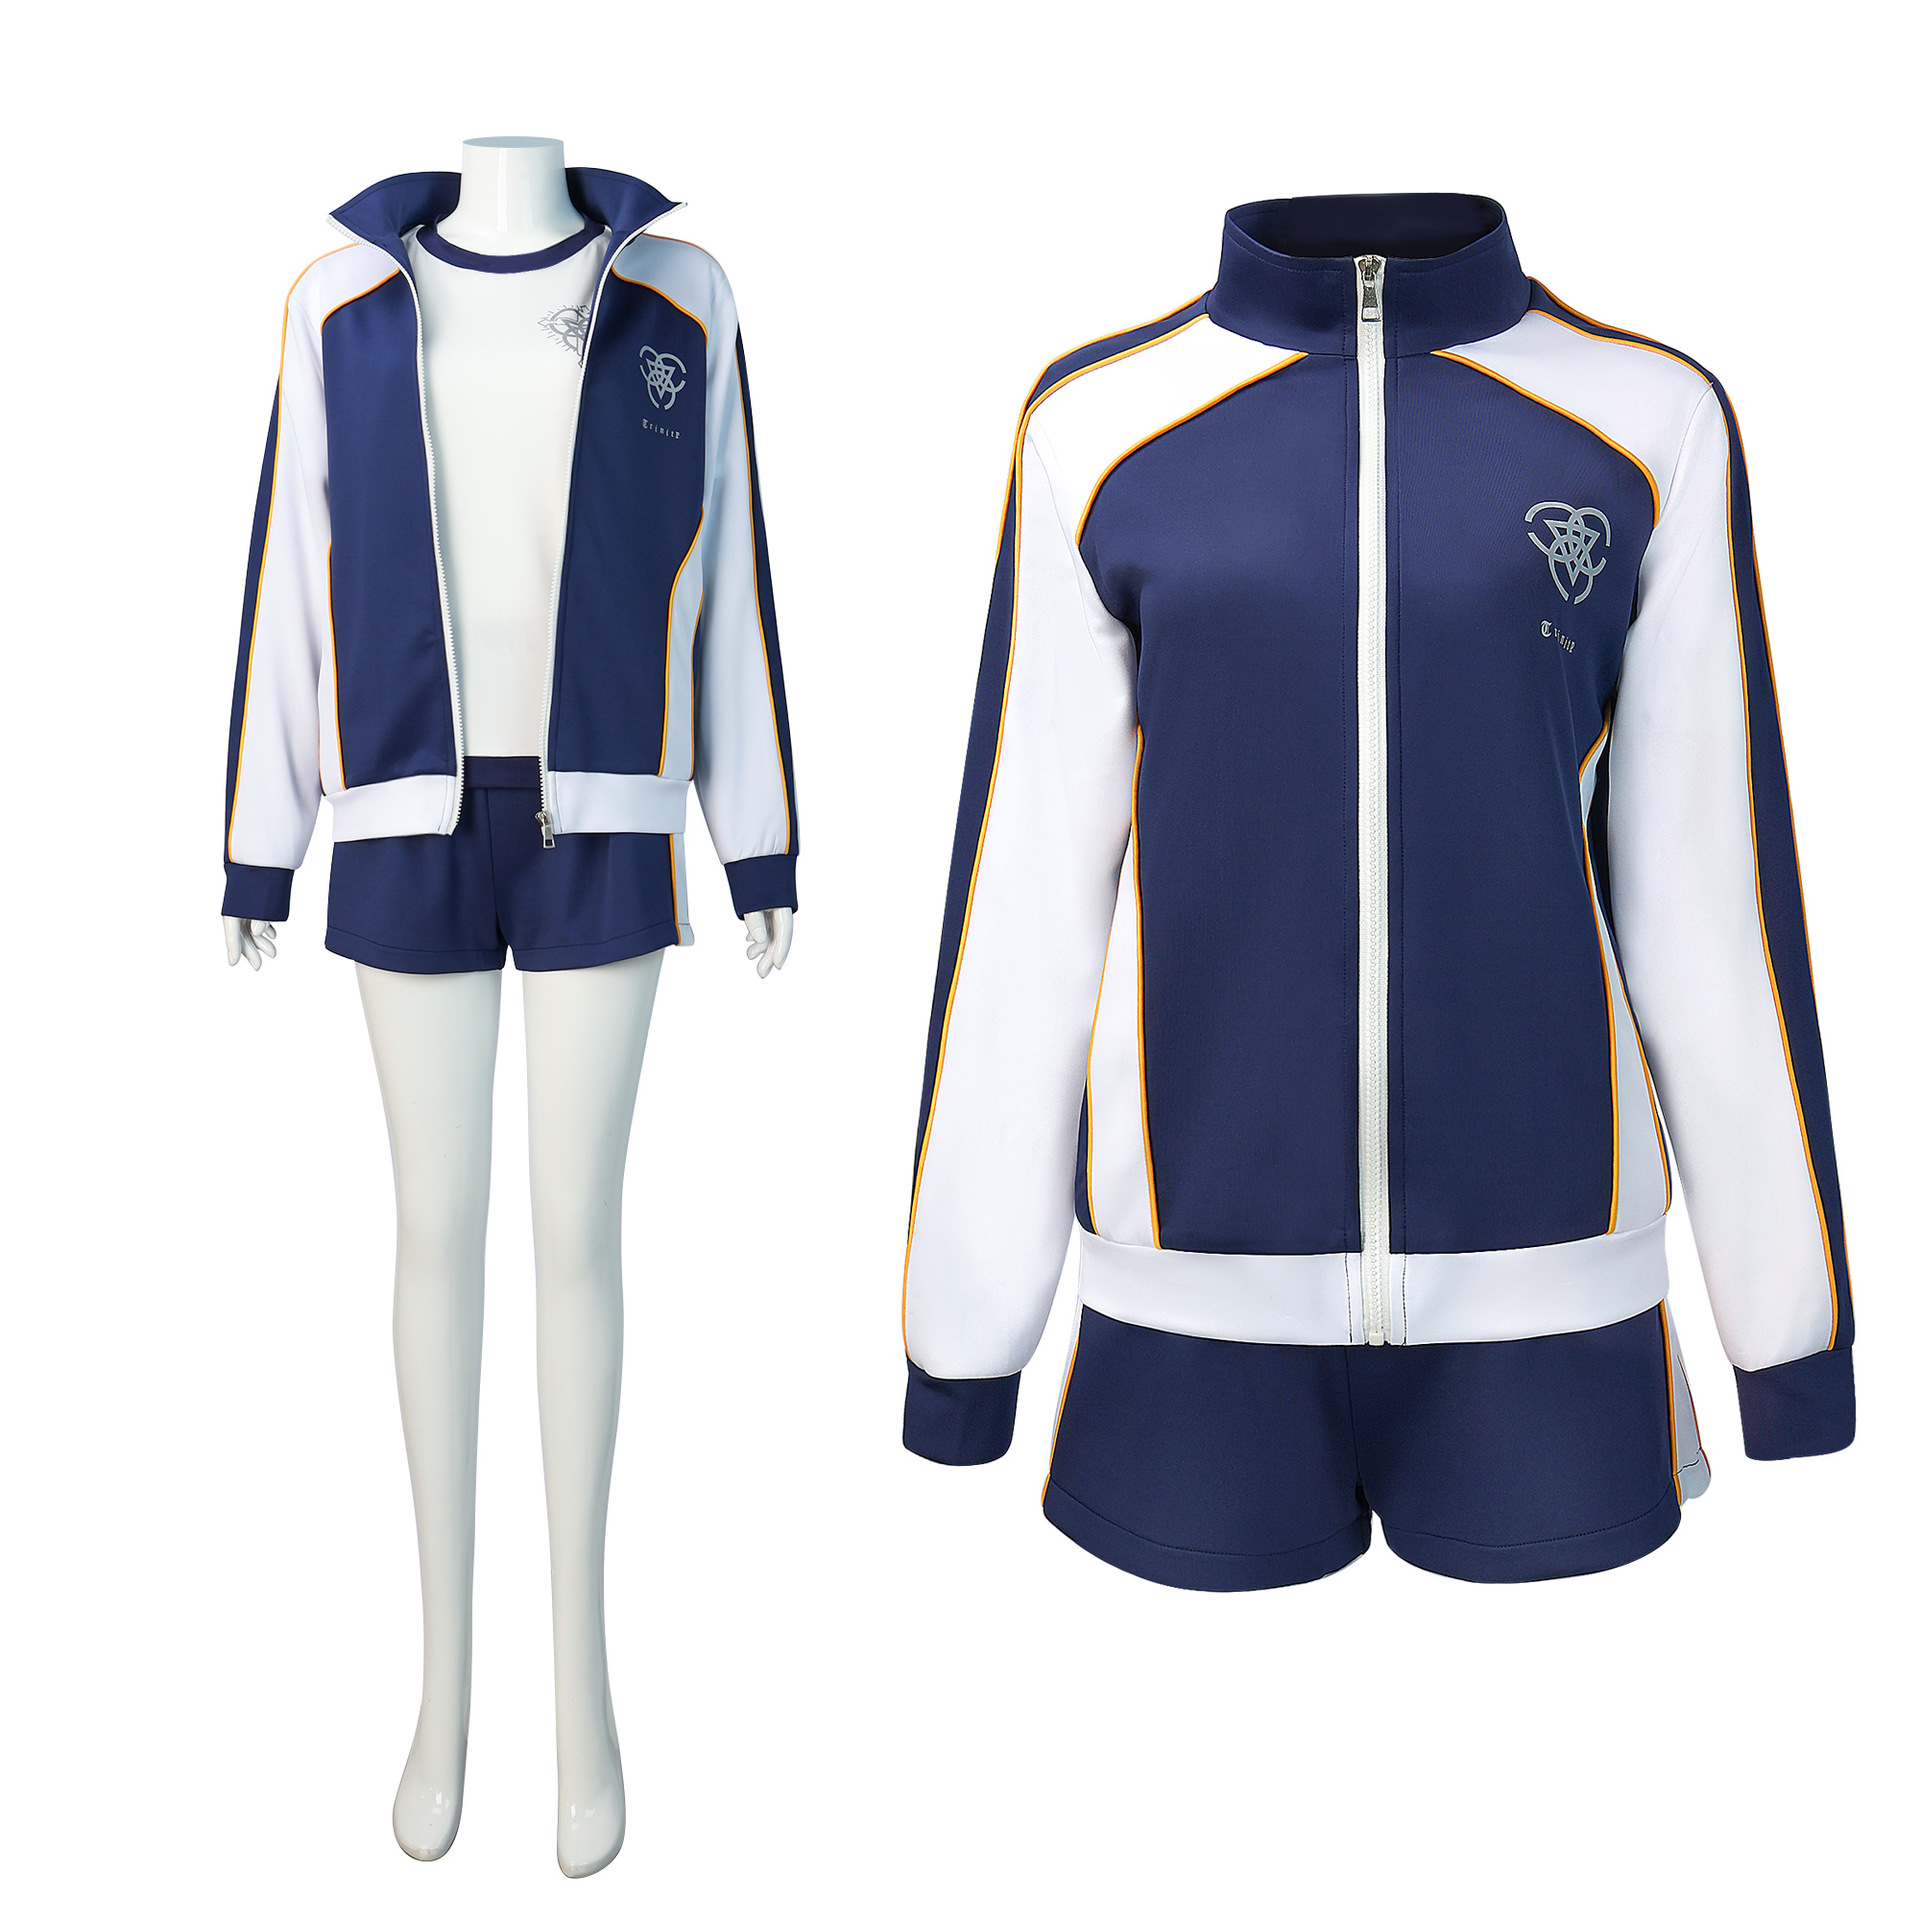 Game Blue Archive Iochi Mari Gym Halloween Cosplay Costume Outfits Carnival Suit Adults